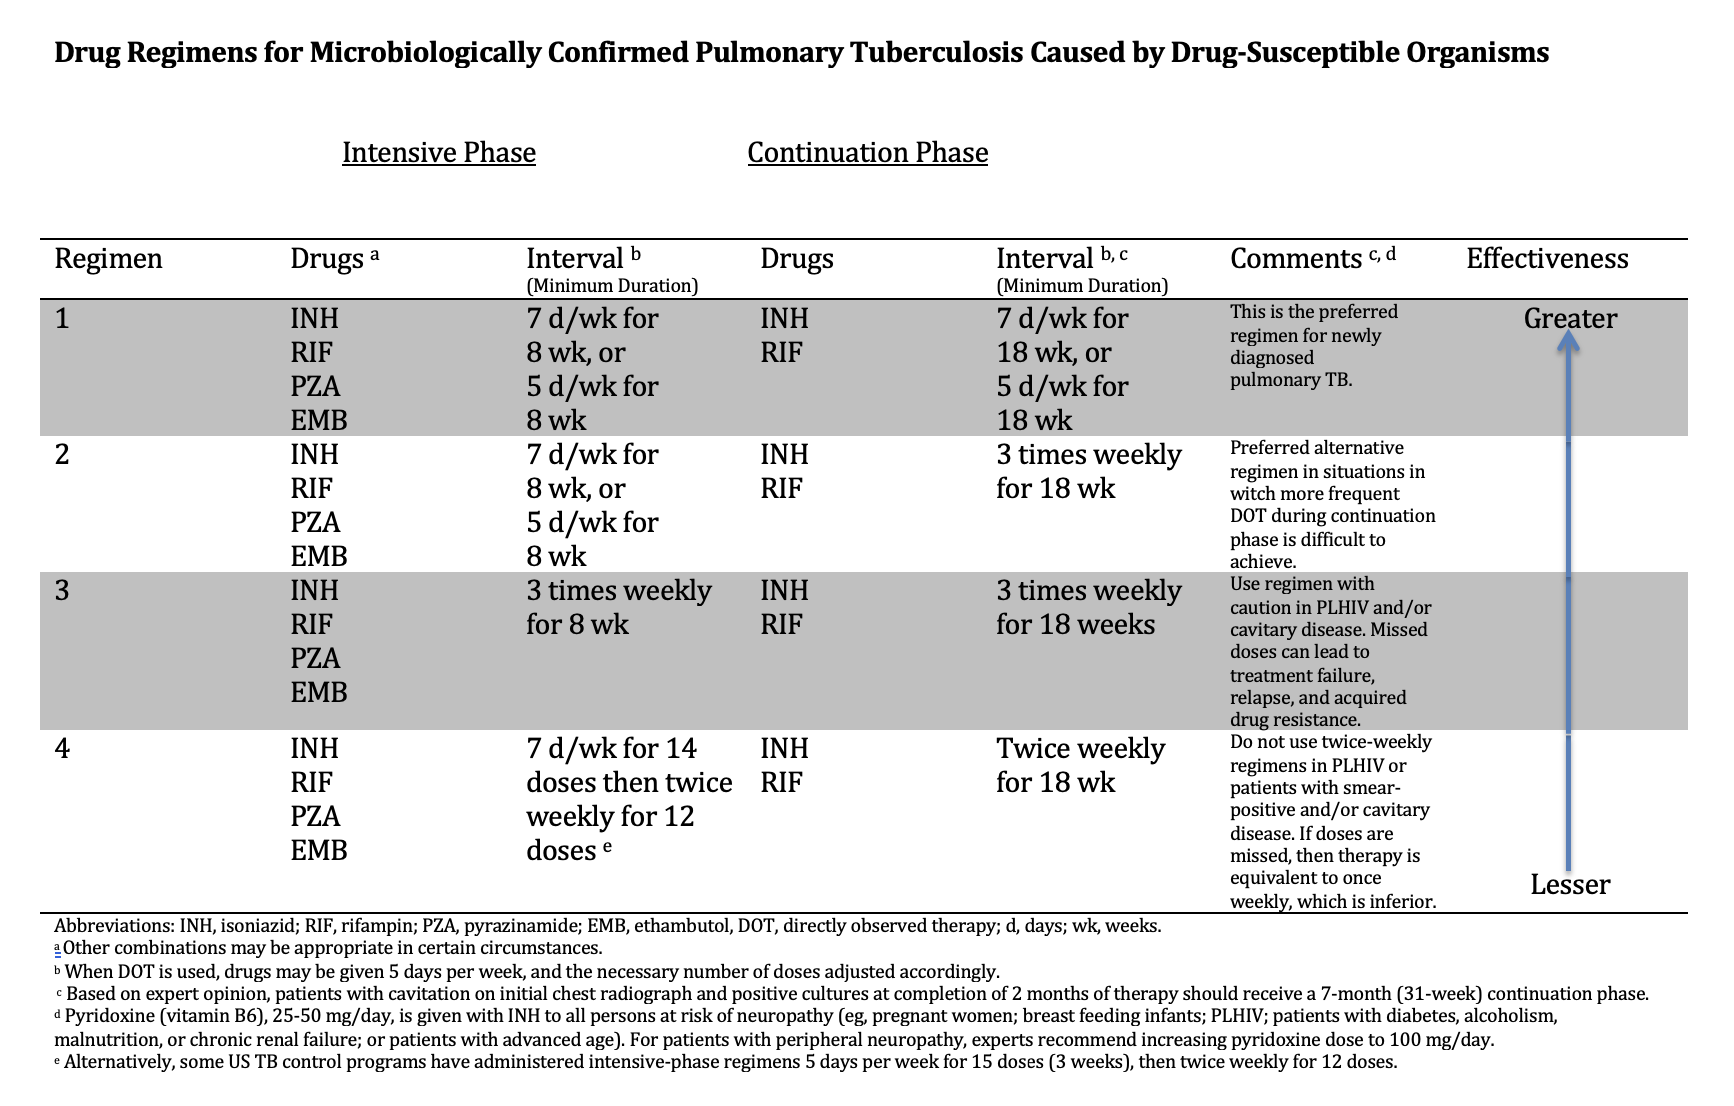 <p>Drug Regimens for Microbiologically Confirmed Pulmonary Tuberculosis Caused by Drug-Susceptible Organisms</p>